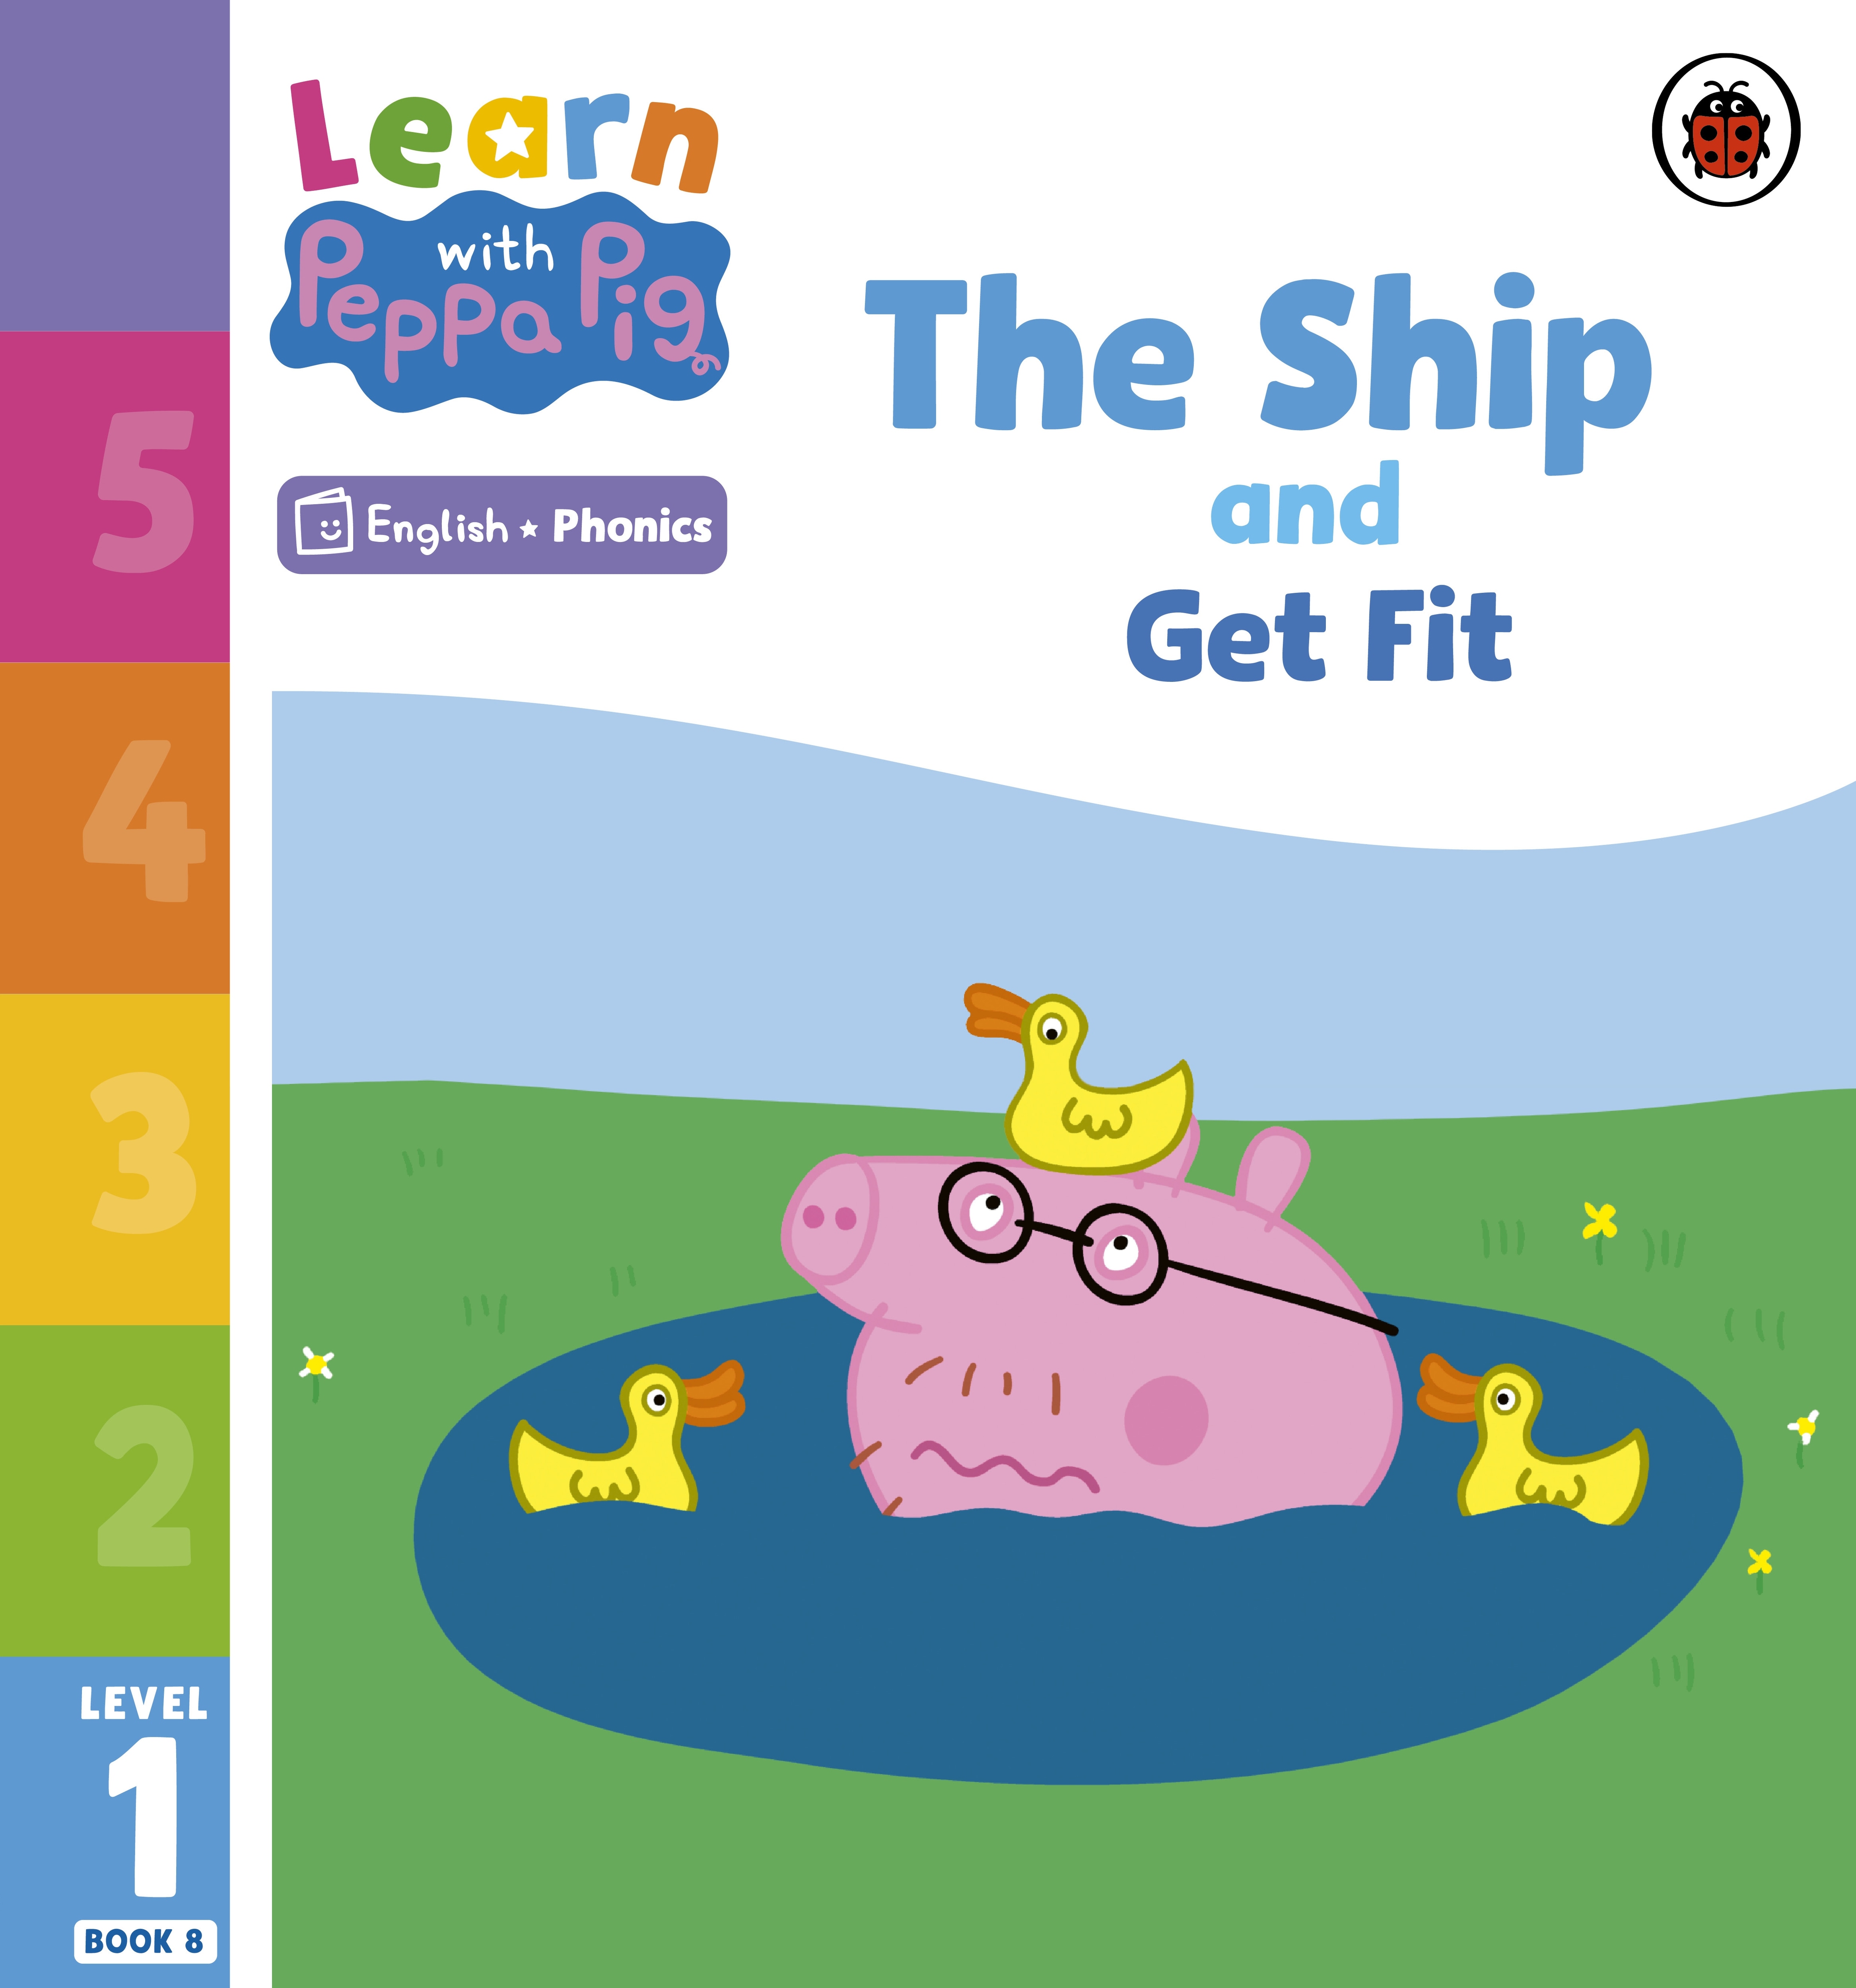 Learn with Peppa Phonics Level 1 Book 8 — The Ship and Get Fit (Phonics Reader)